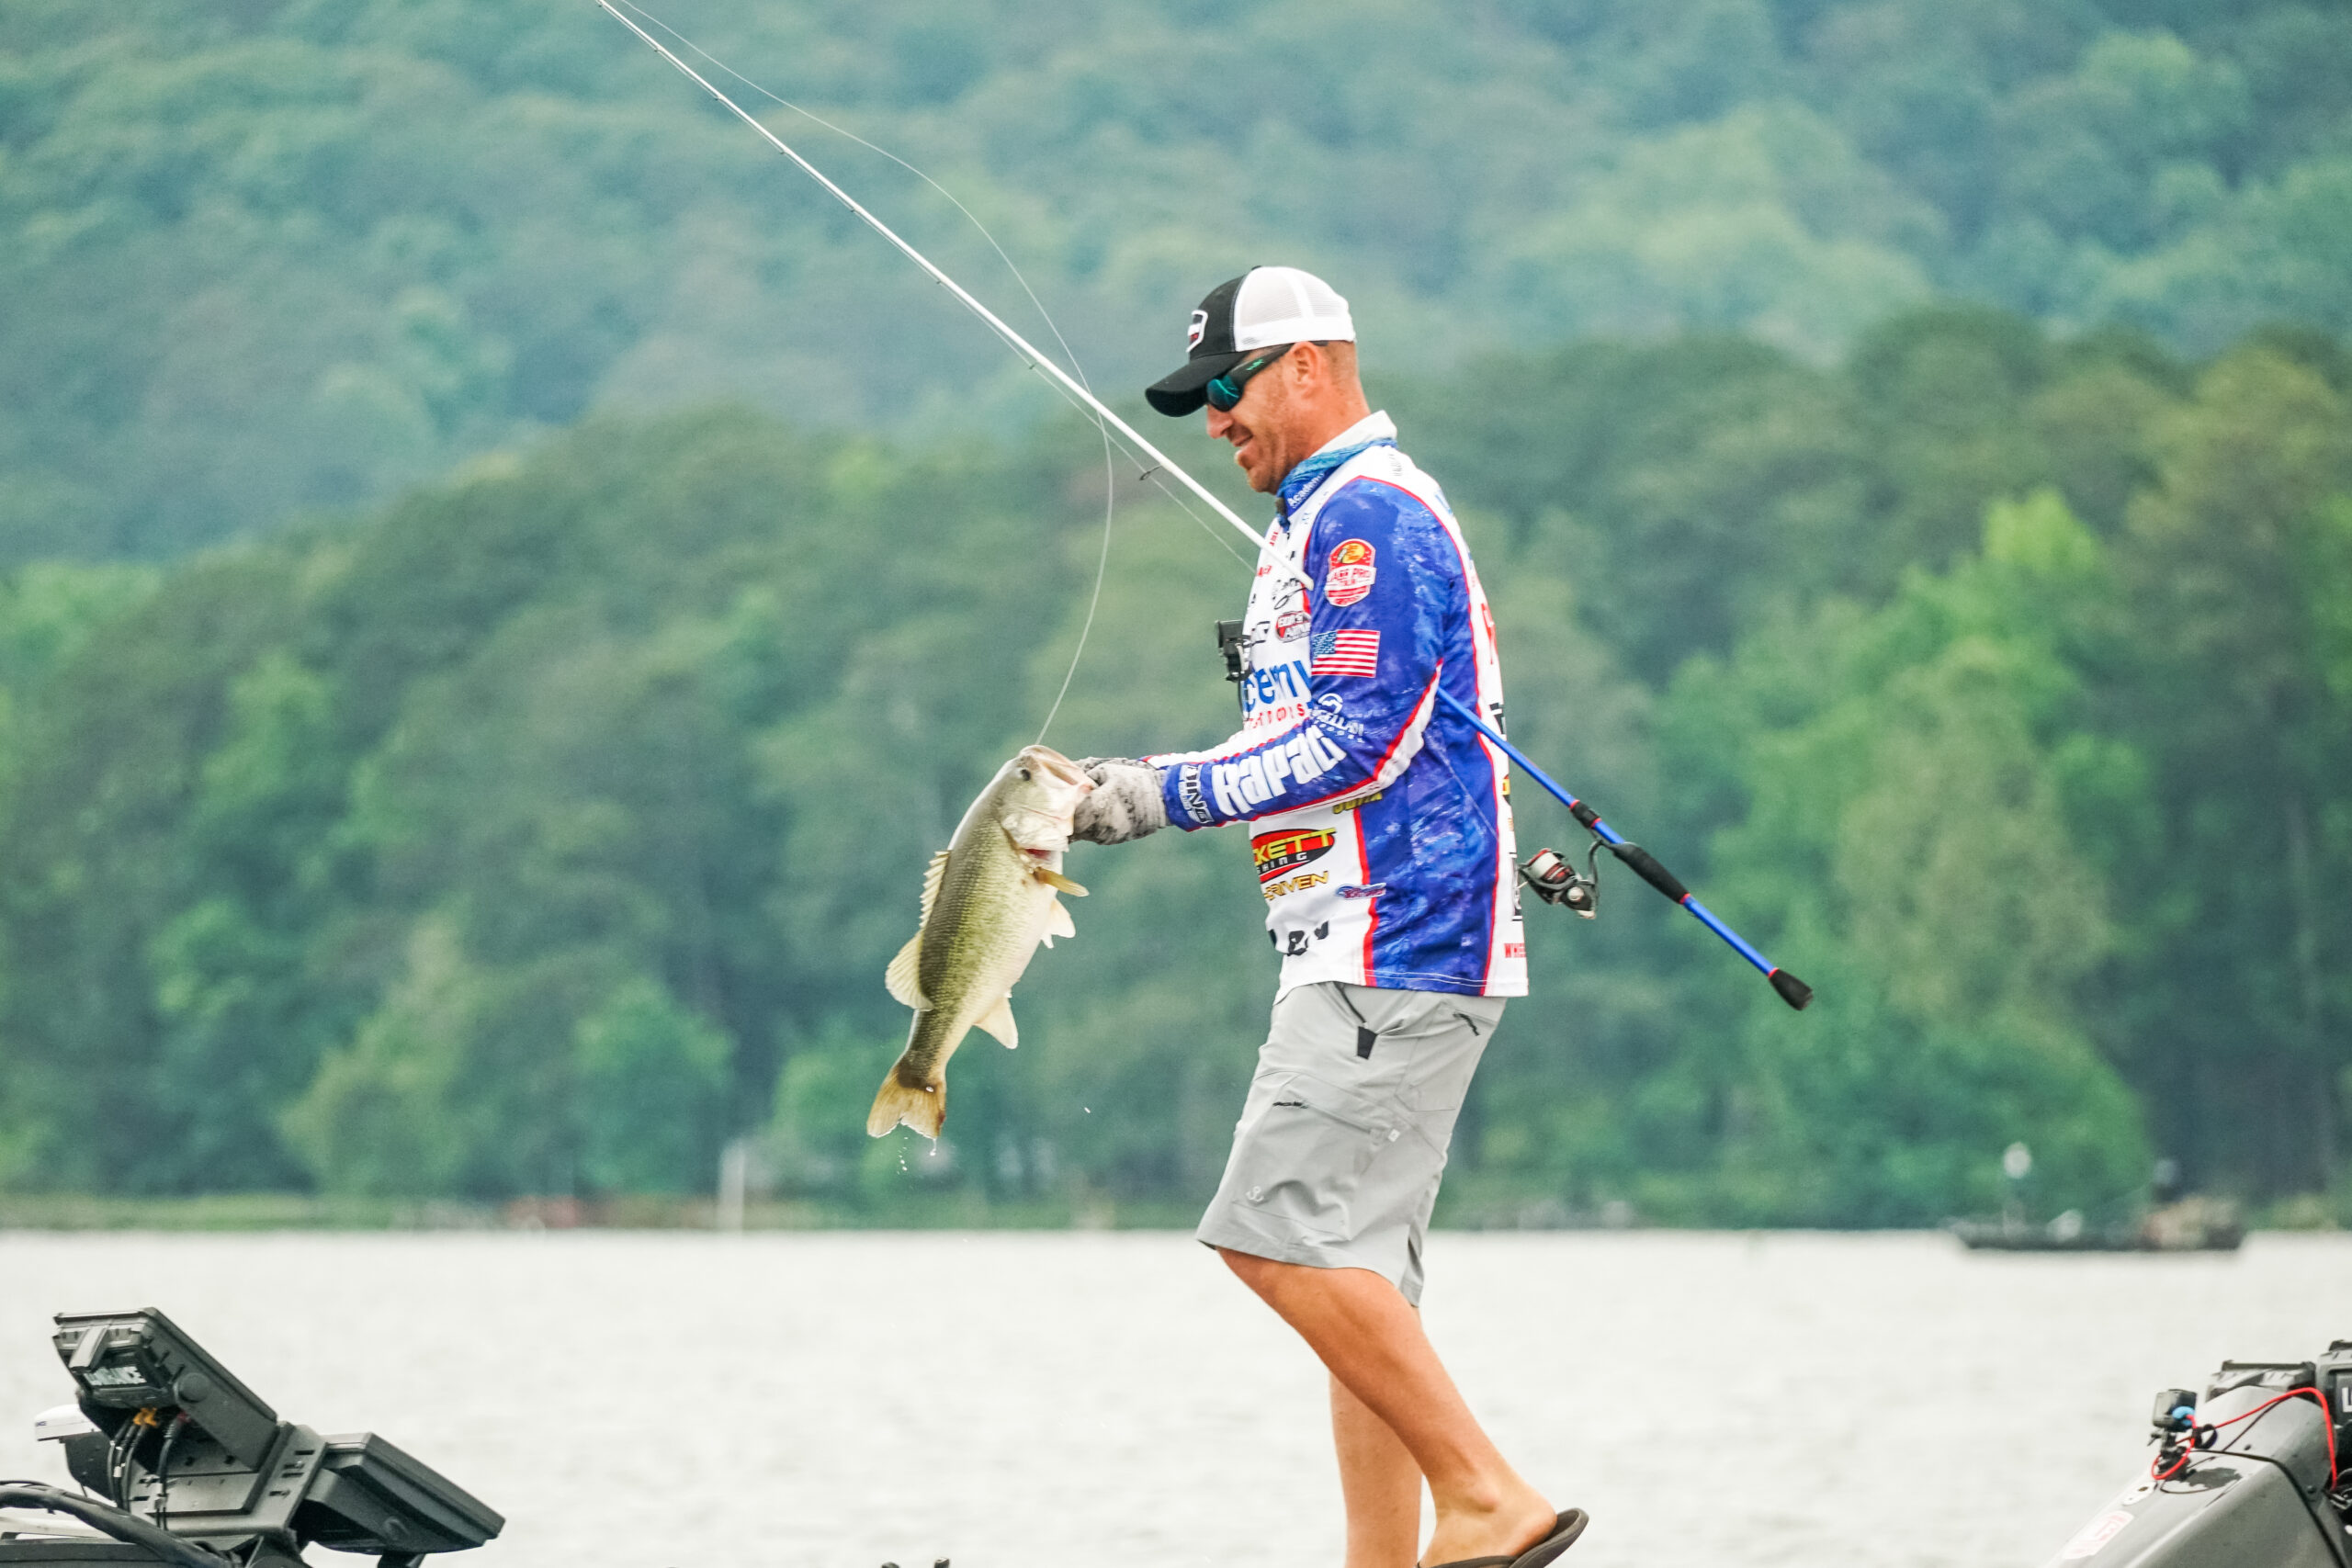 Wheeler leads going into final day at Bass Pro Tour Toro Stage